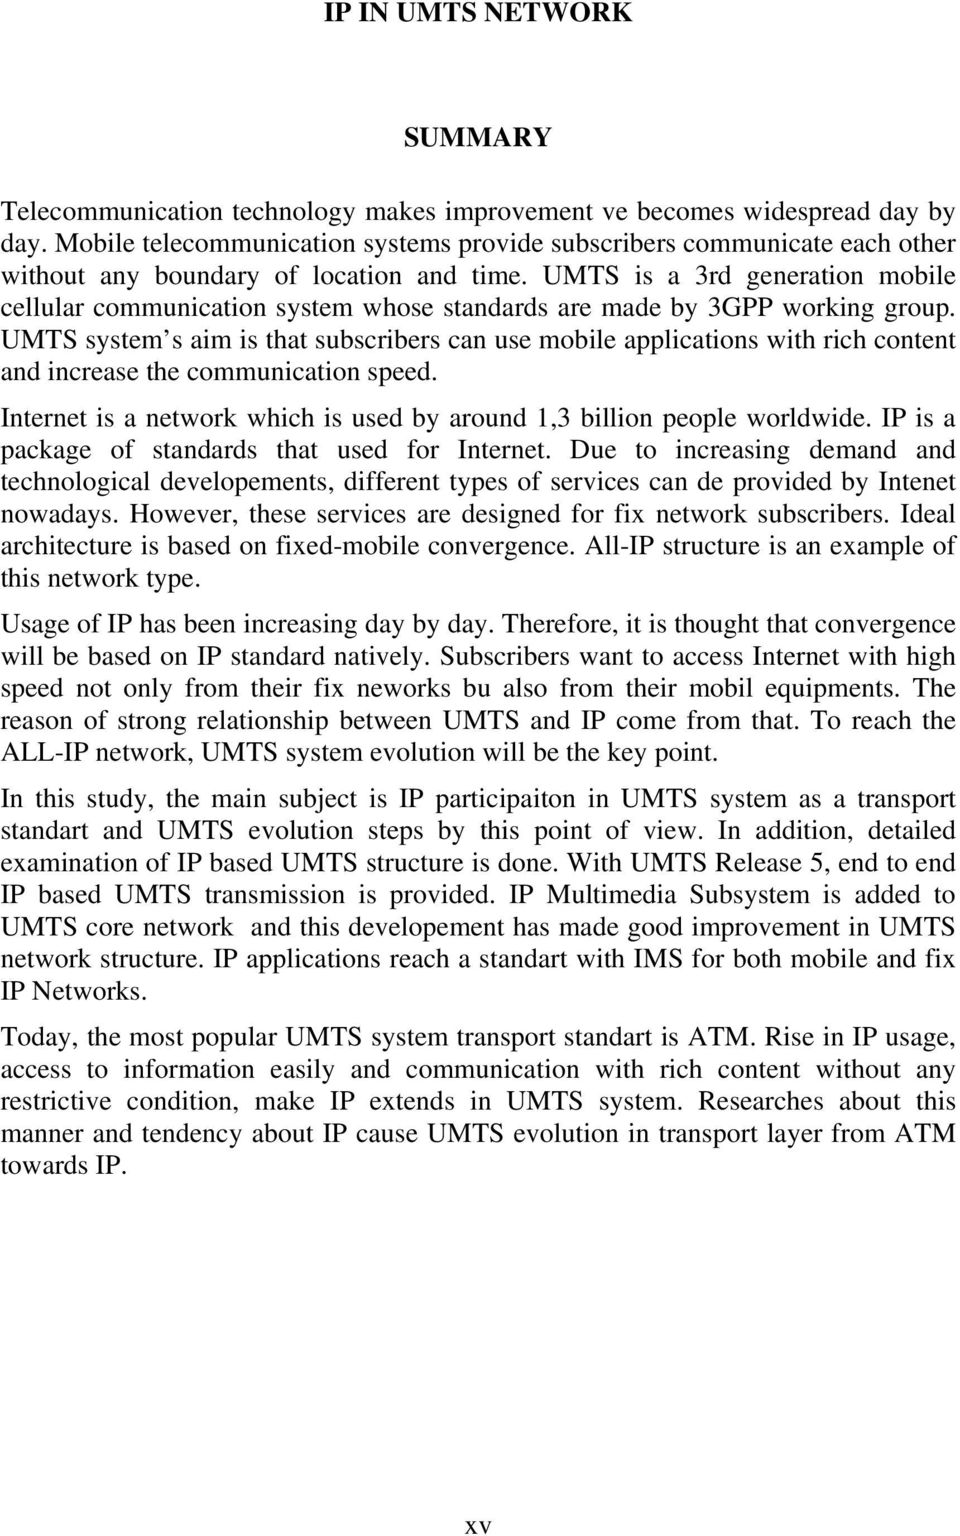 UMTS is a 3rd generation mobile cellular communication system whose standards are made by 3GPP working group.